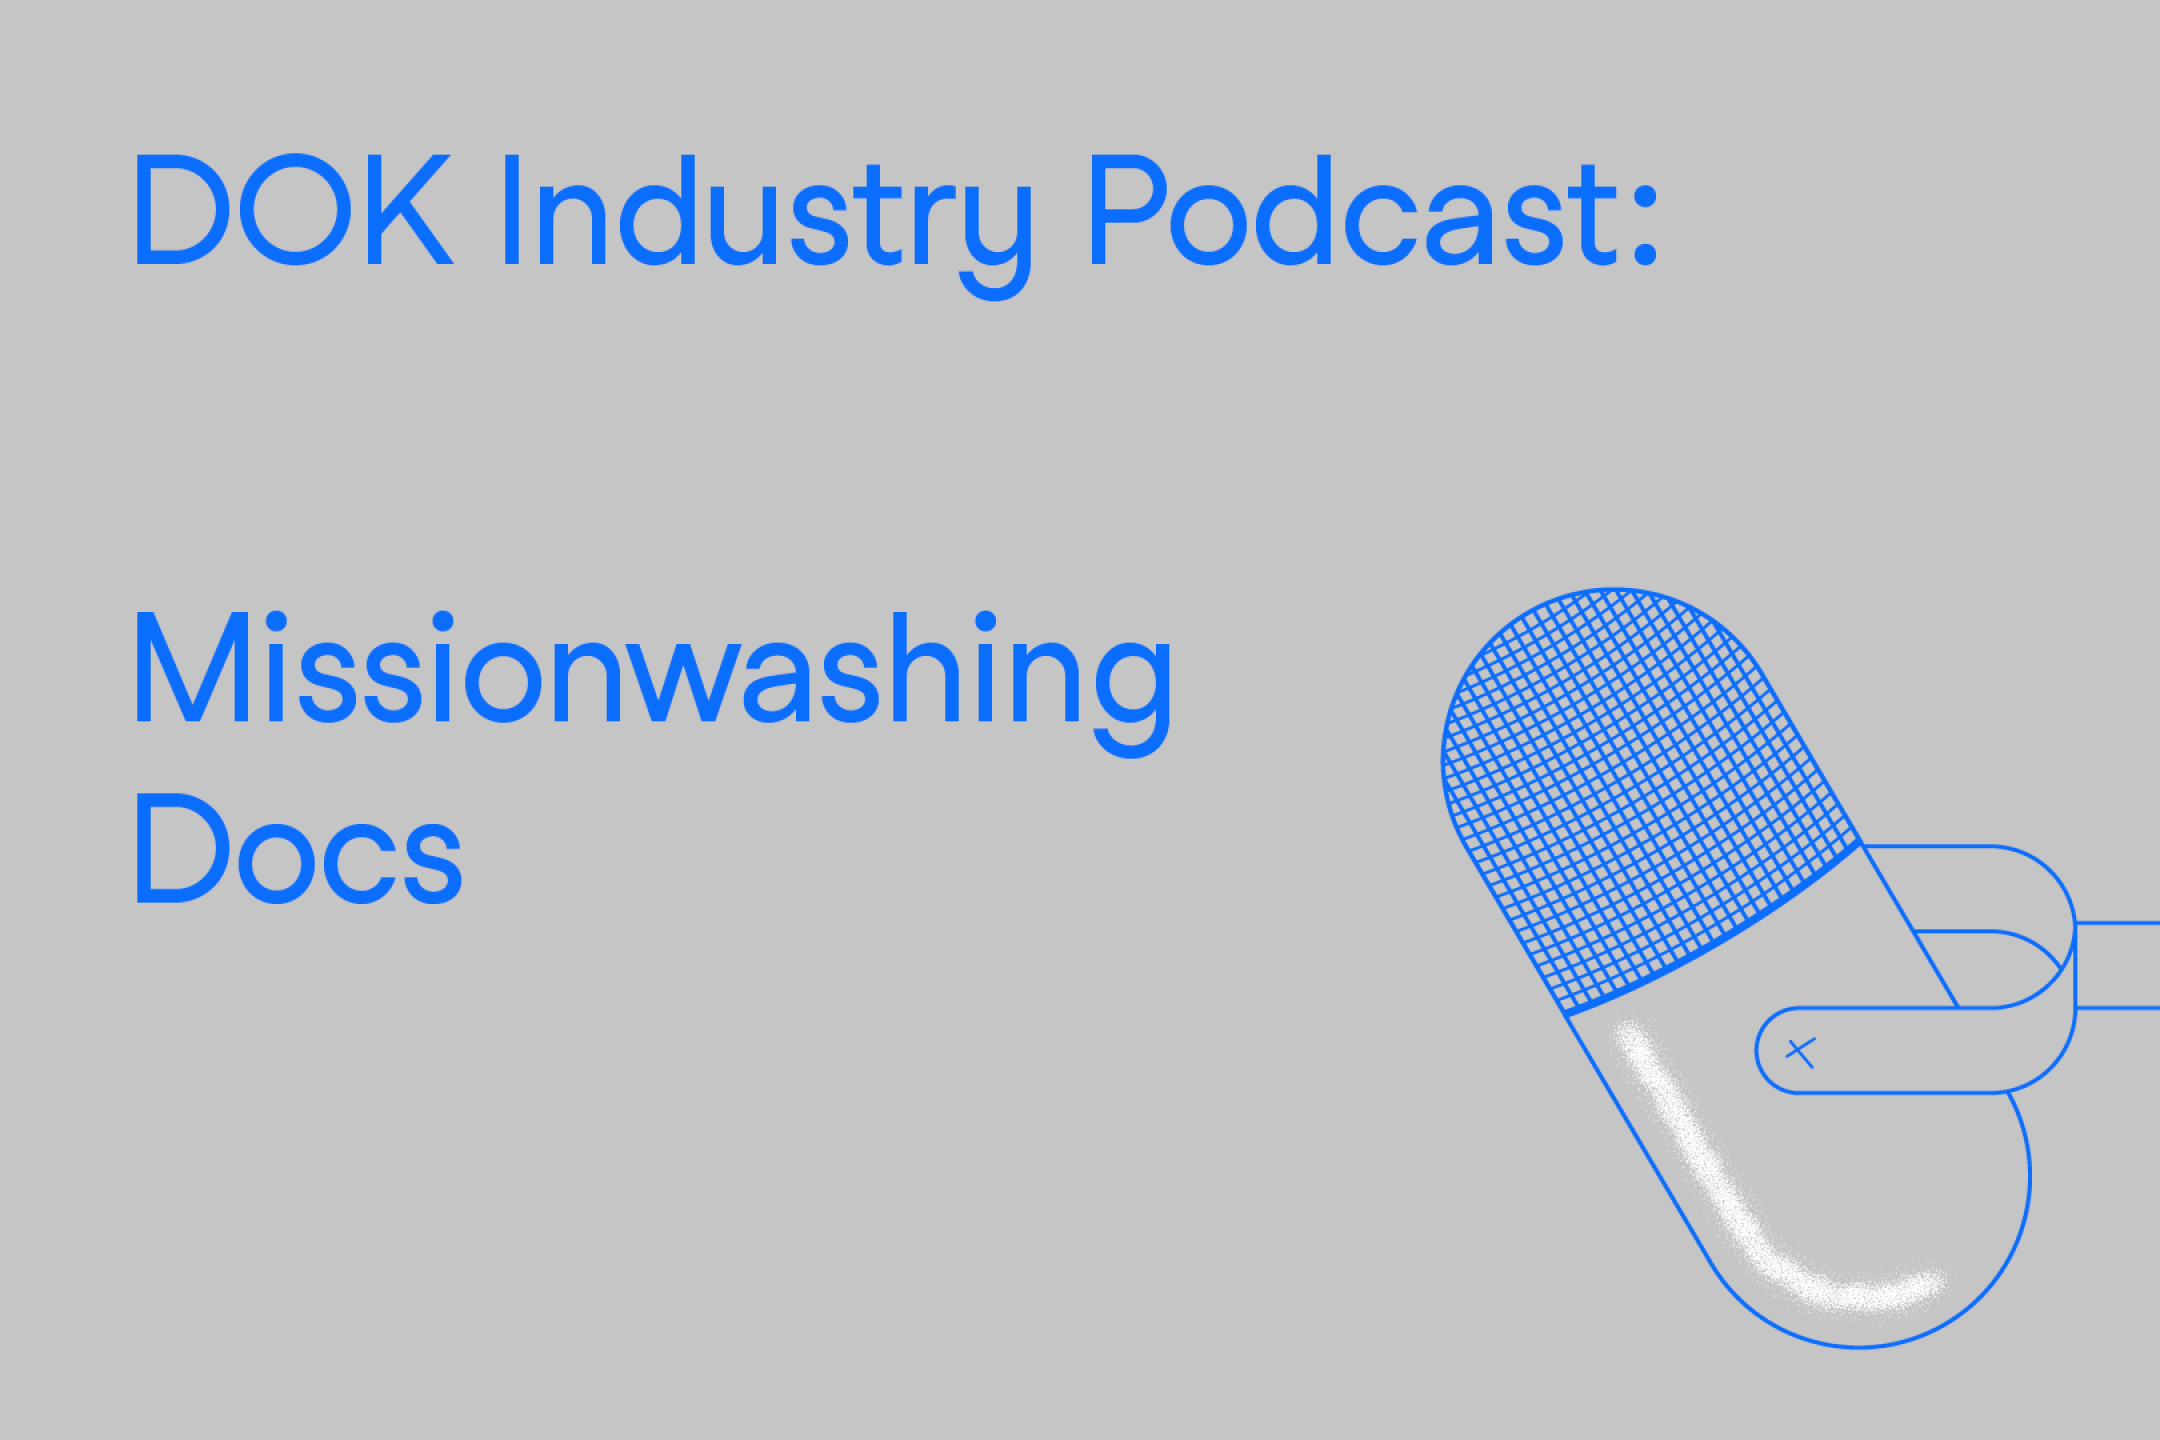 A text graphic: At the right a radio microphone in blue, at the left the text: "DOK Industry Podcast: Missionwashing Docs"